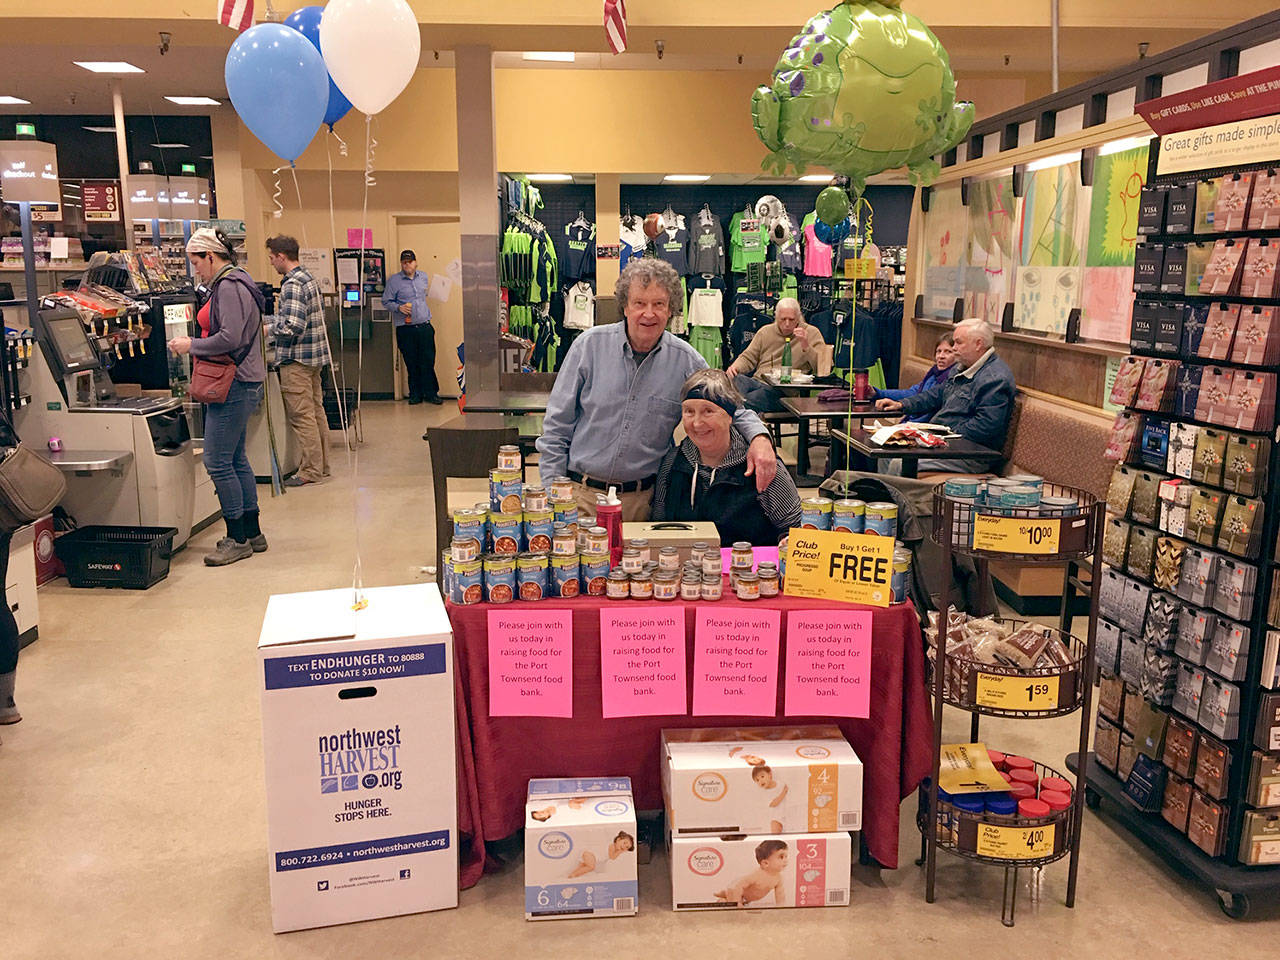 Herb Tracy and Kathy Ryan, volunteers for the Port Townsend Food Bank, man a donations table at the Safeway on 442 W Sims Way in Port Townsend on Friday.